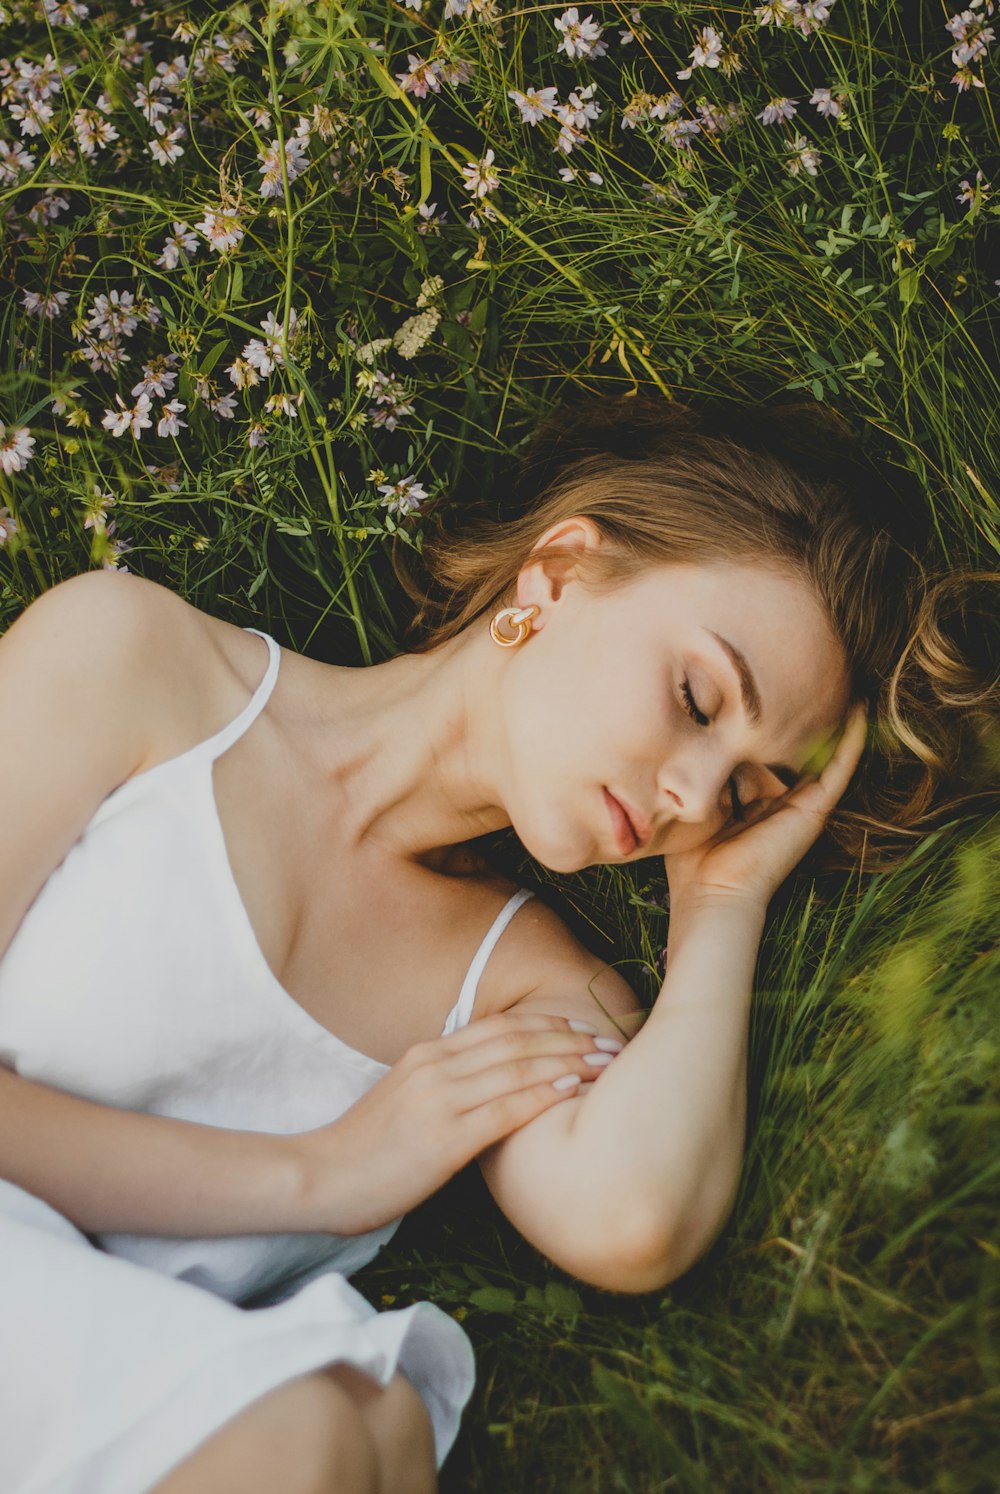 woman in white tank top lying on green grass during daytime